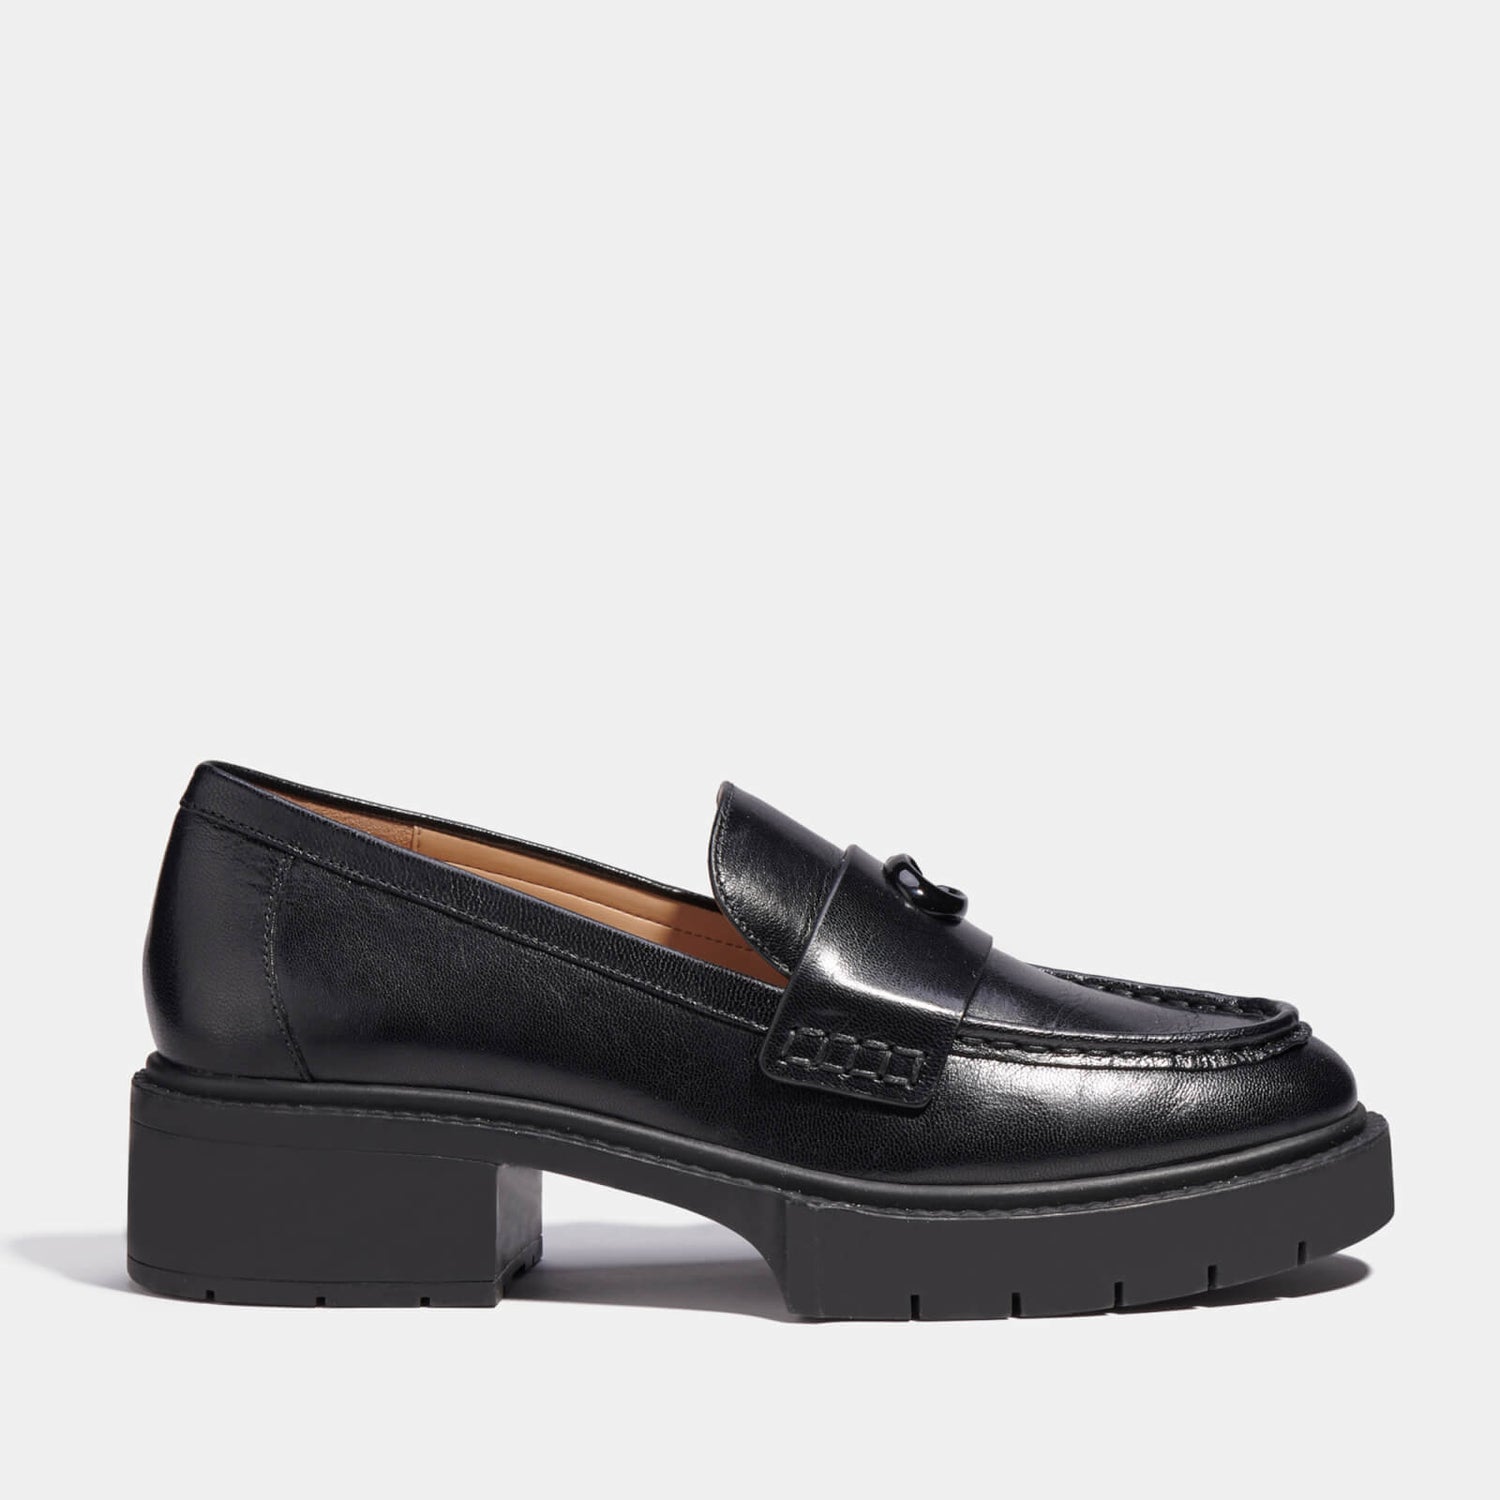 Coach Leah Leather Loafers - UK 4